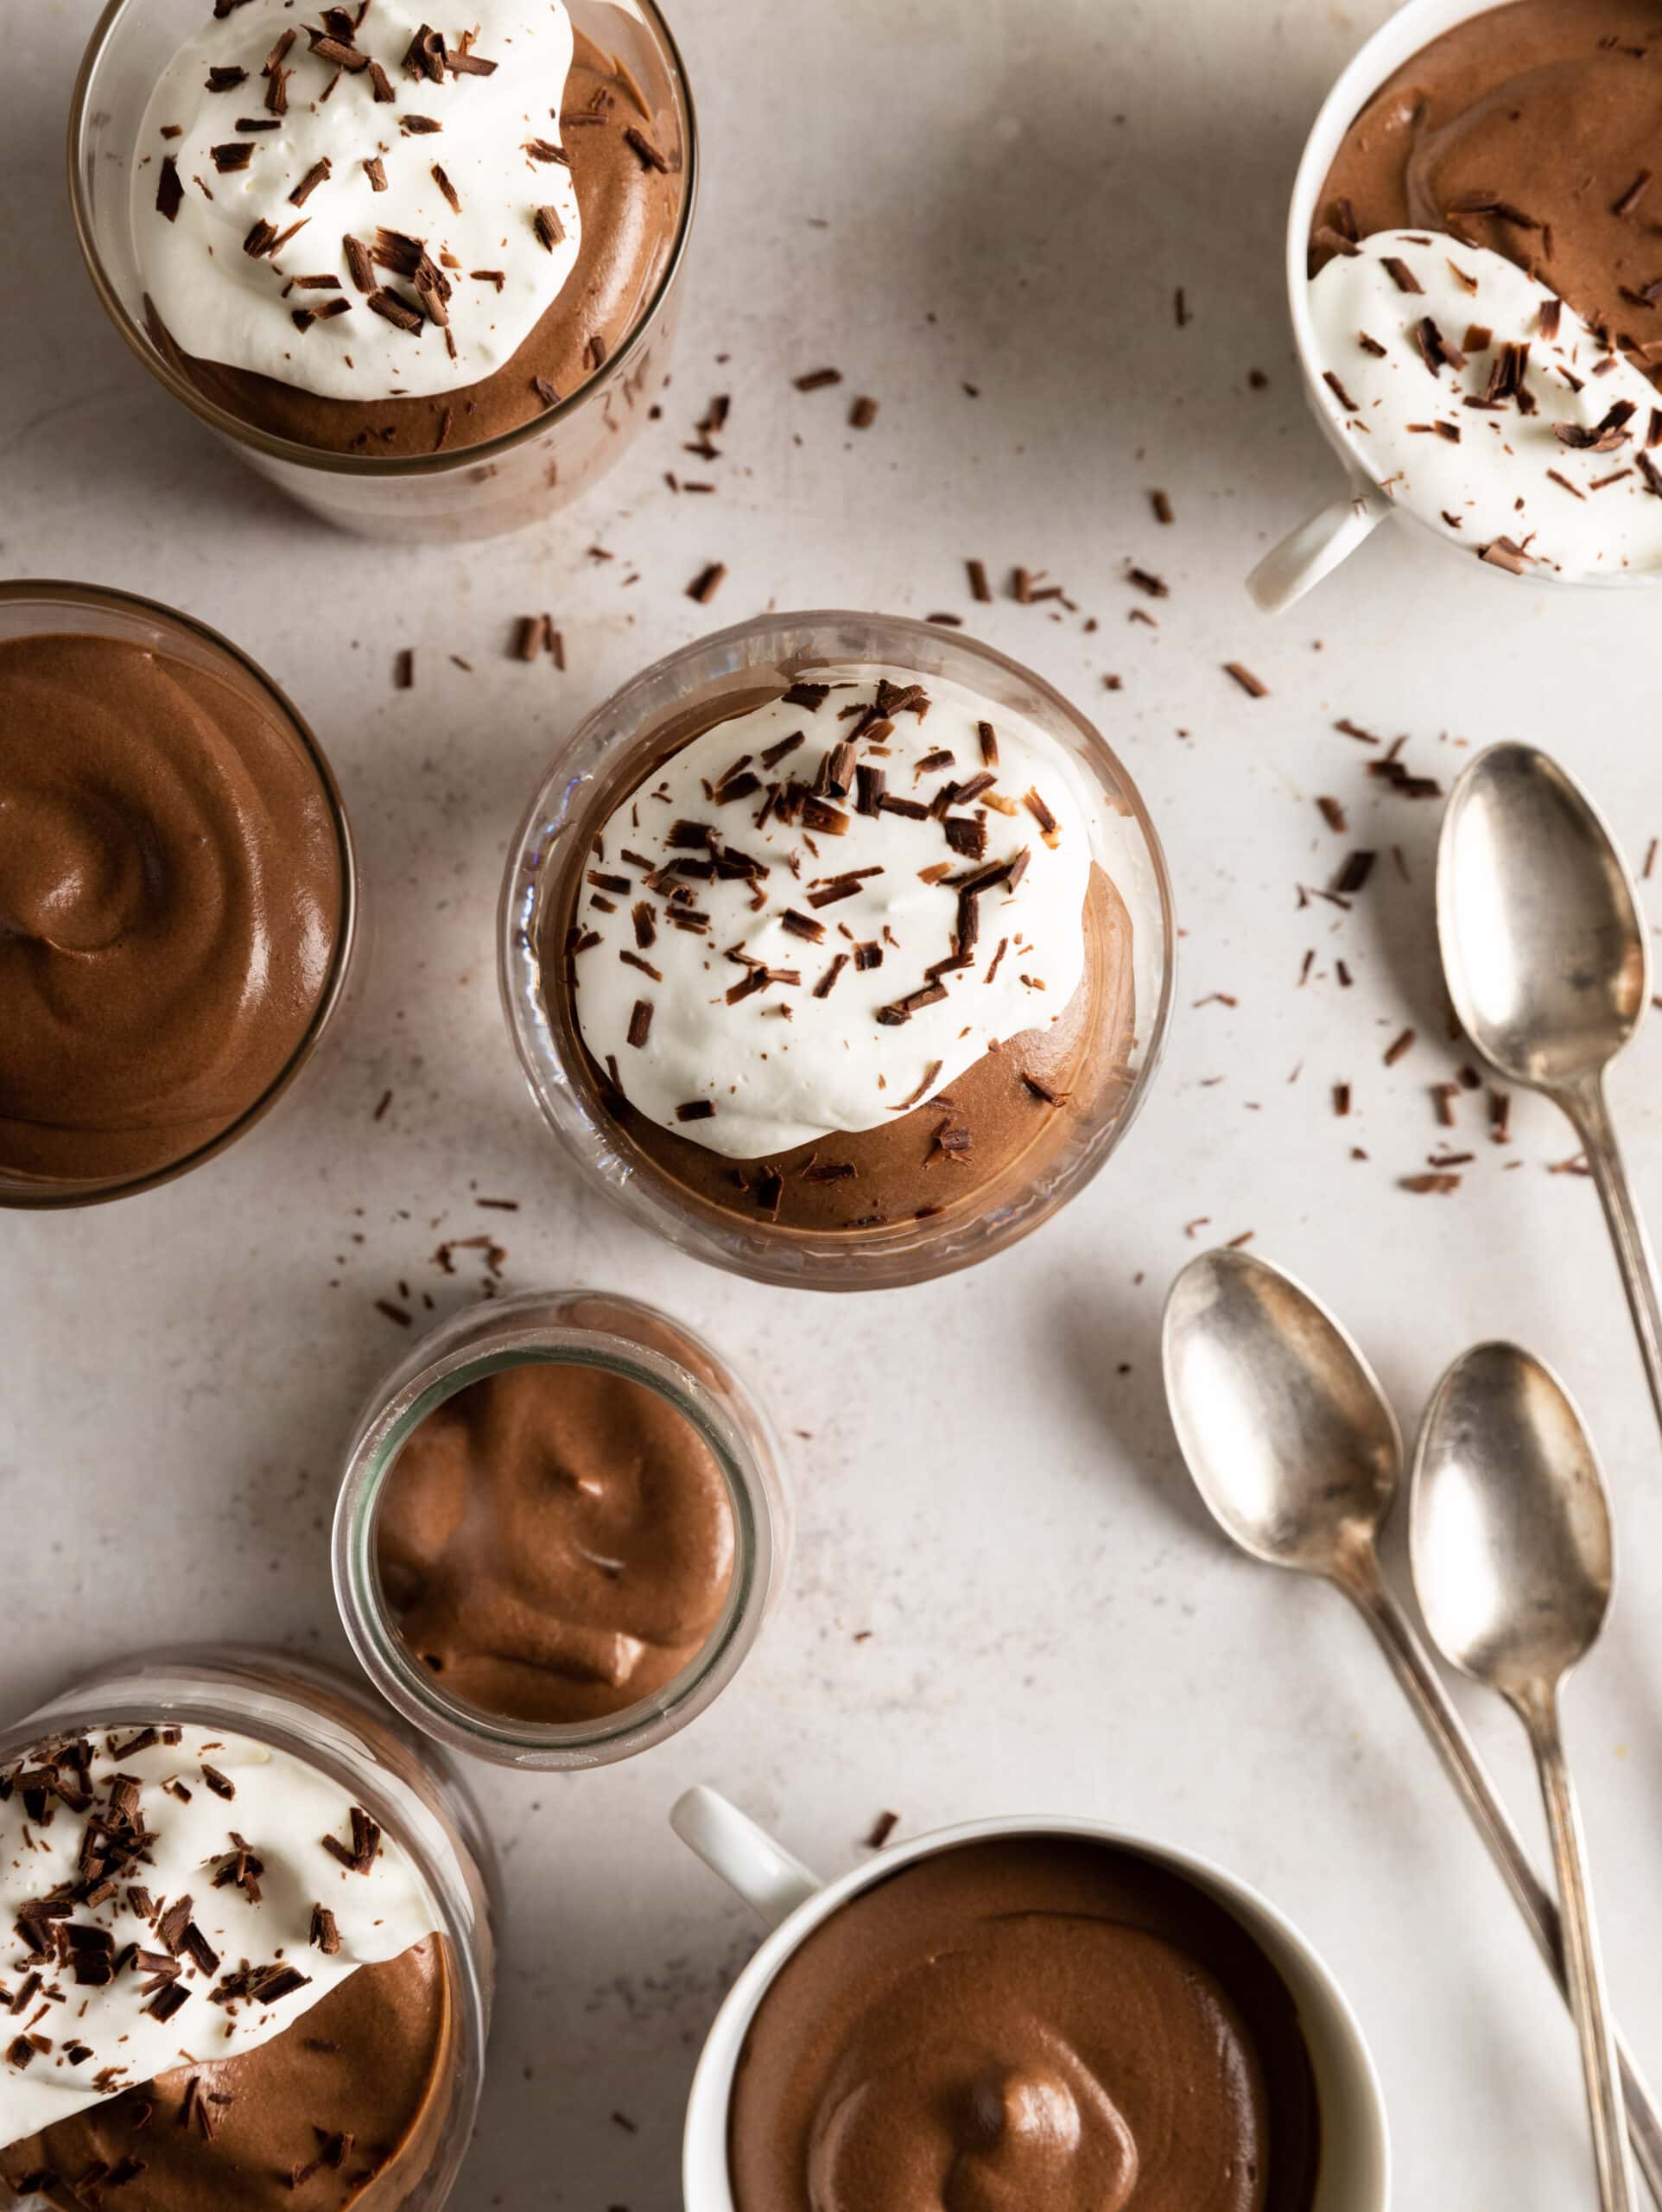 Overhead image of multiple glasses and cups of chocolate Bavarian cream and 3 spoons.